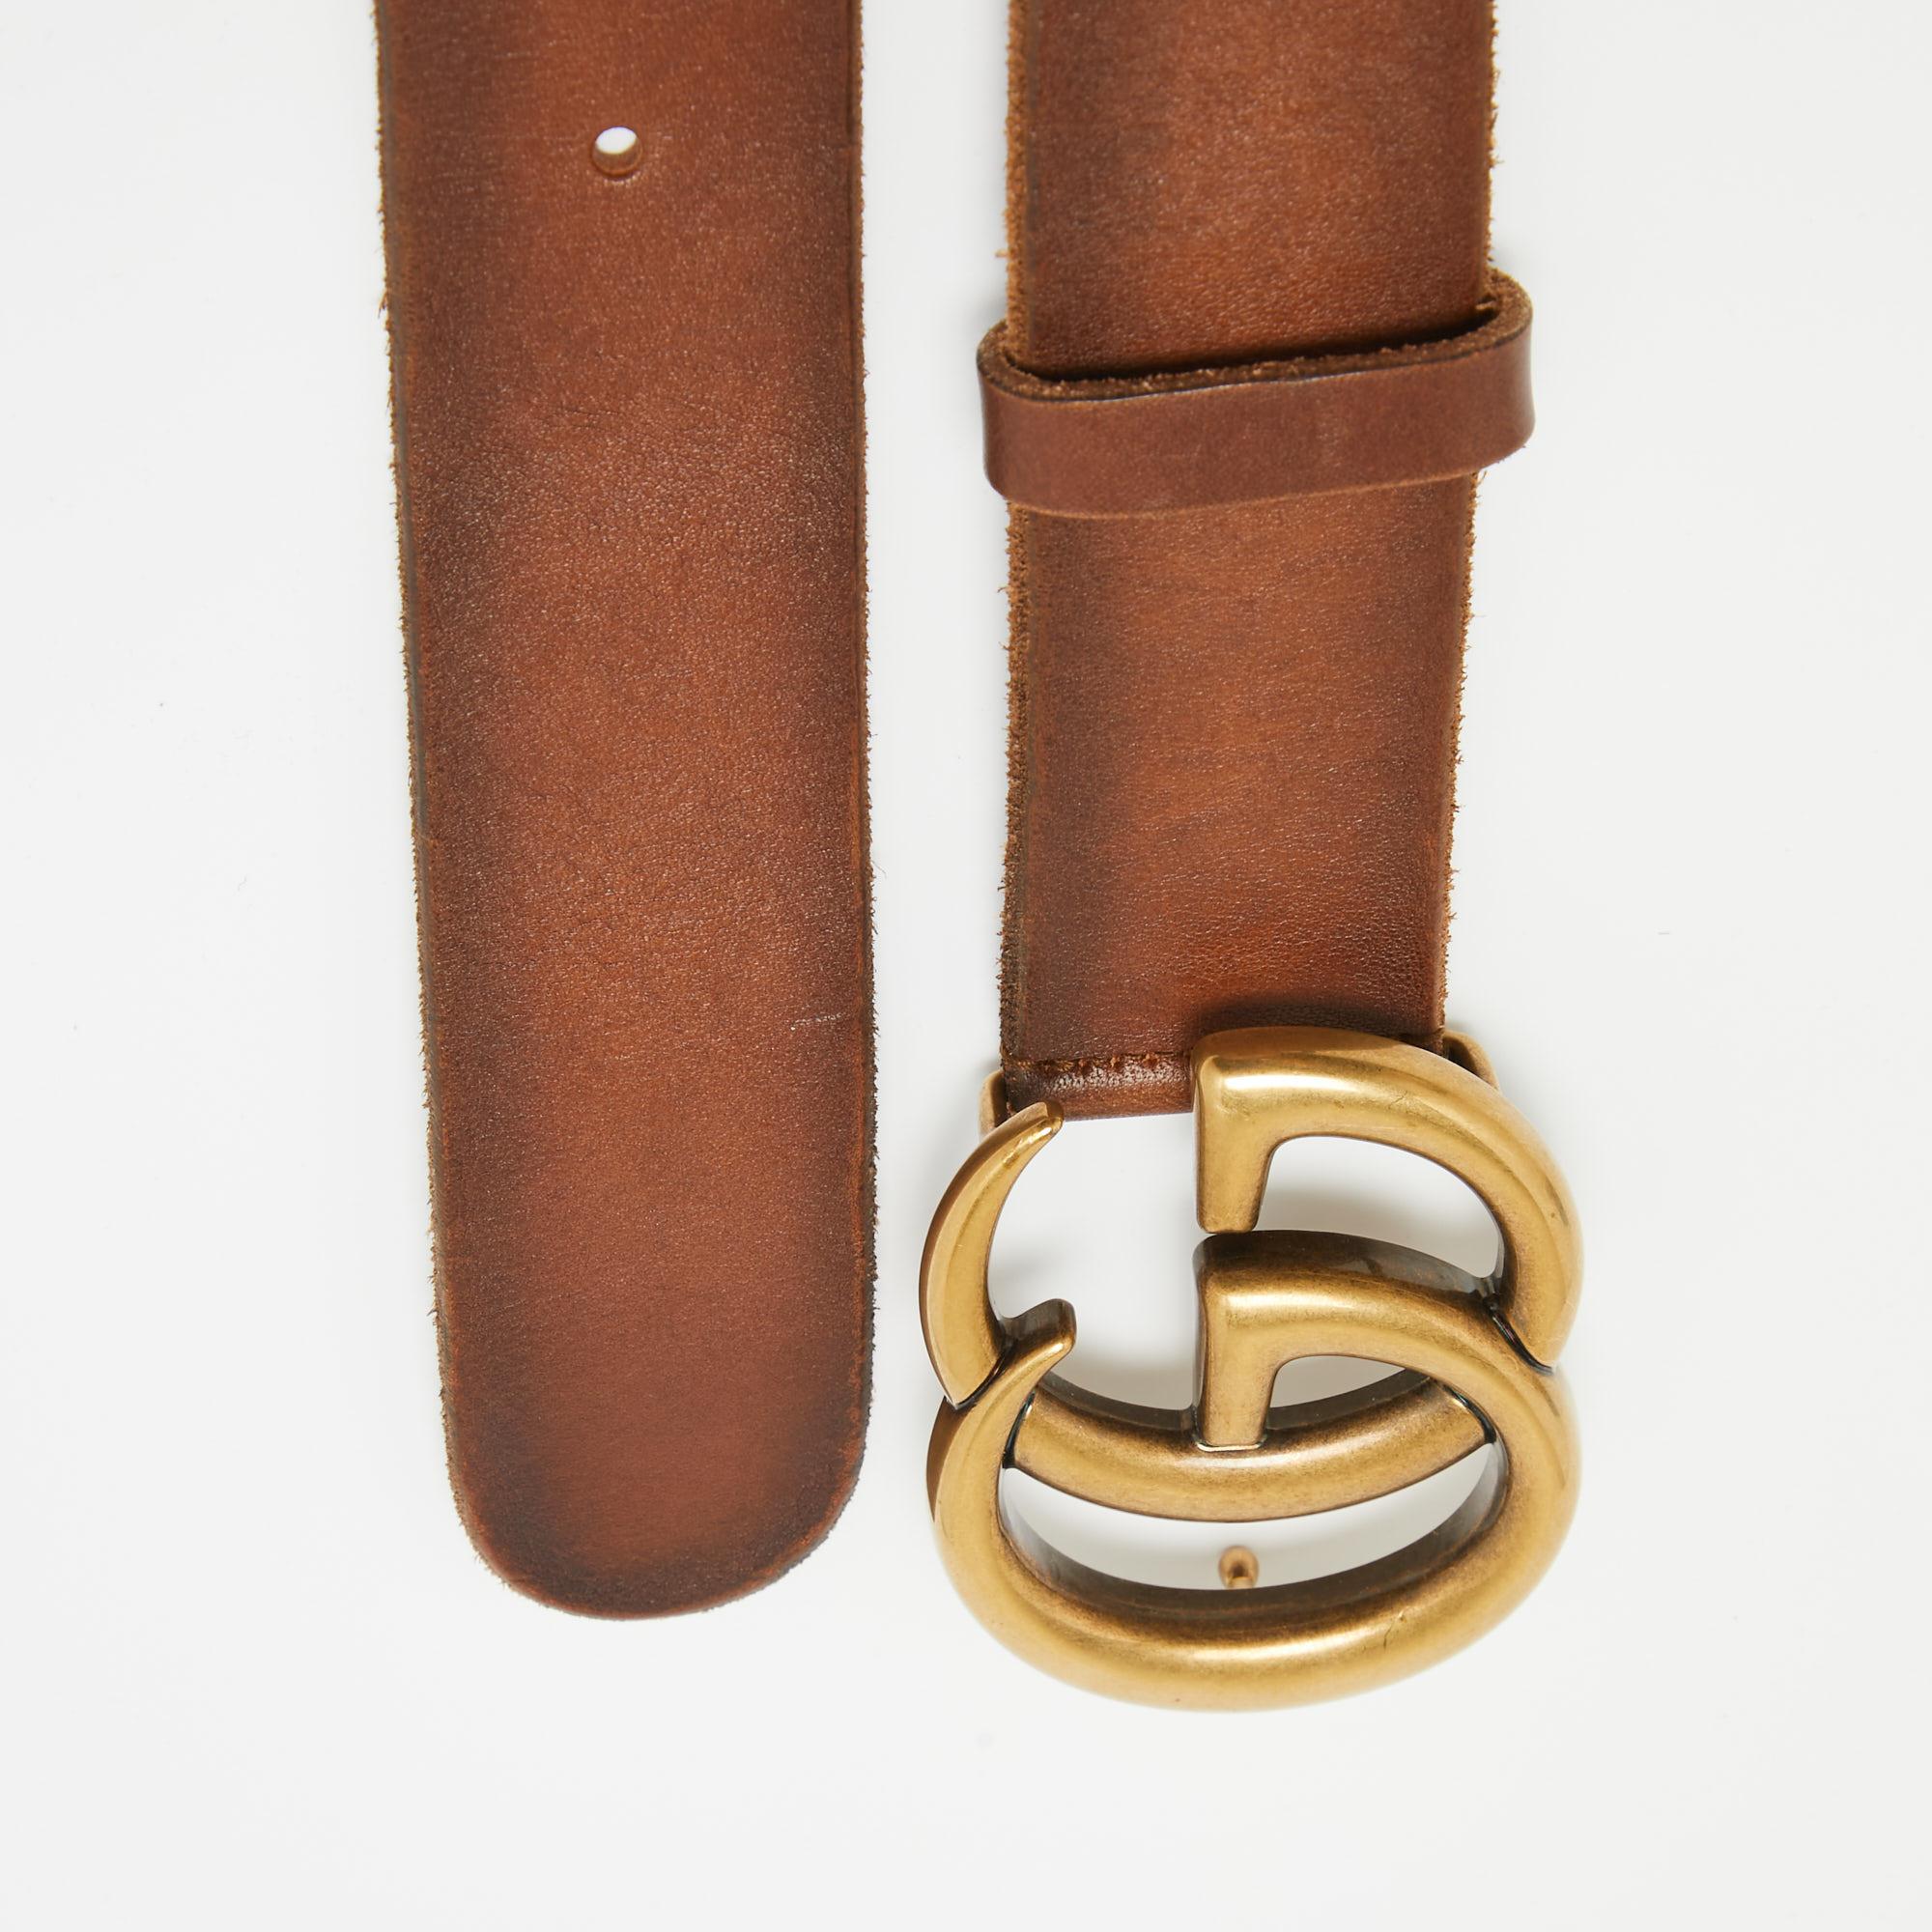 Gucci Brown Faded Leather Double G Buckle Belt 65 CM In Excellent Condition For Sale In Dubai, Al Qouz 2